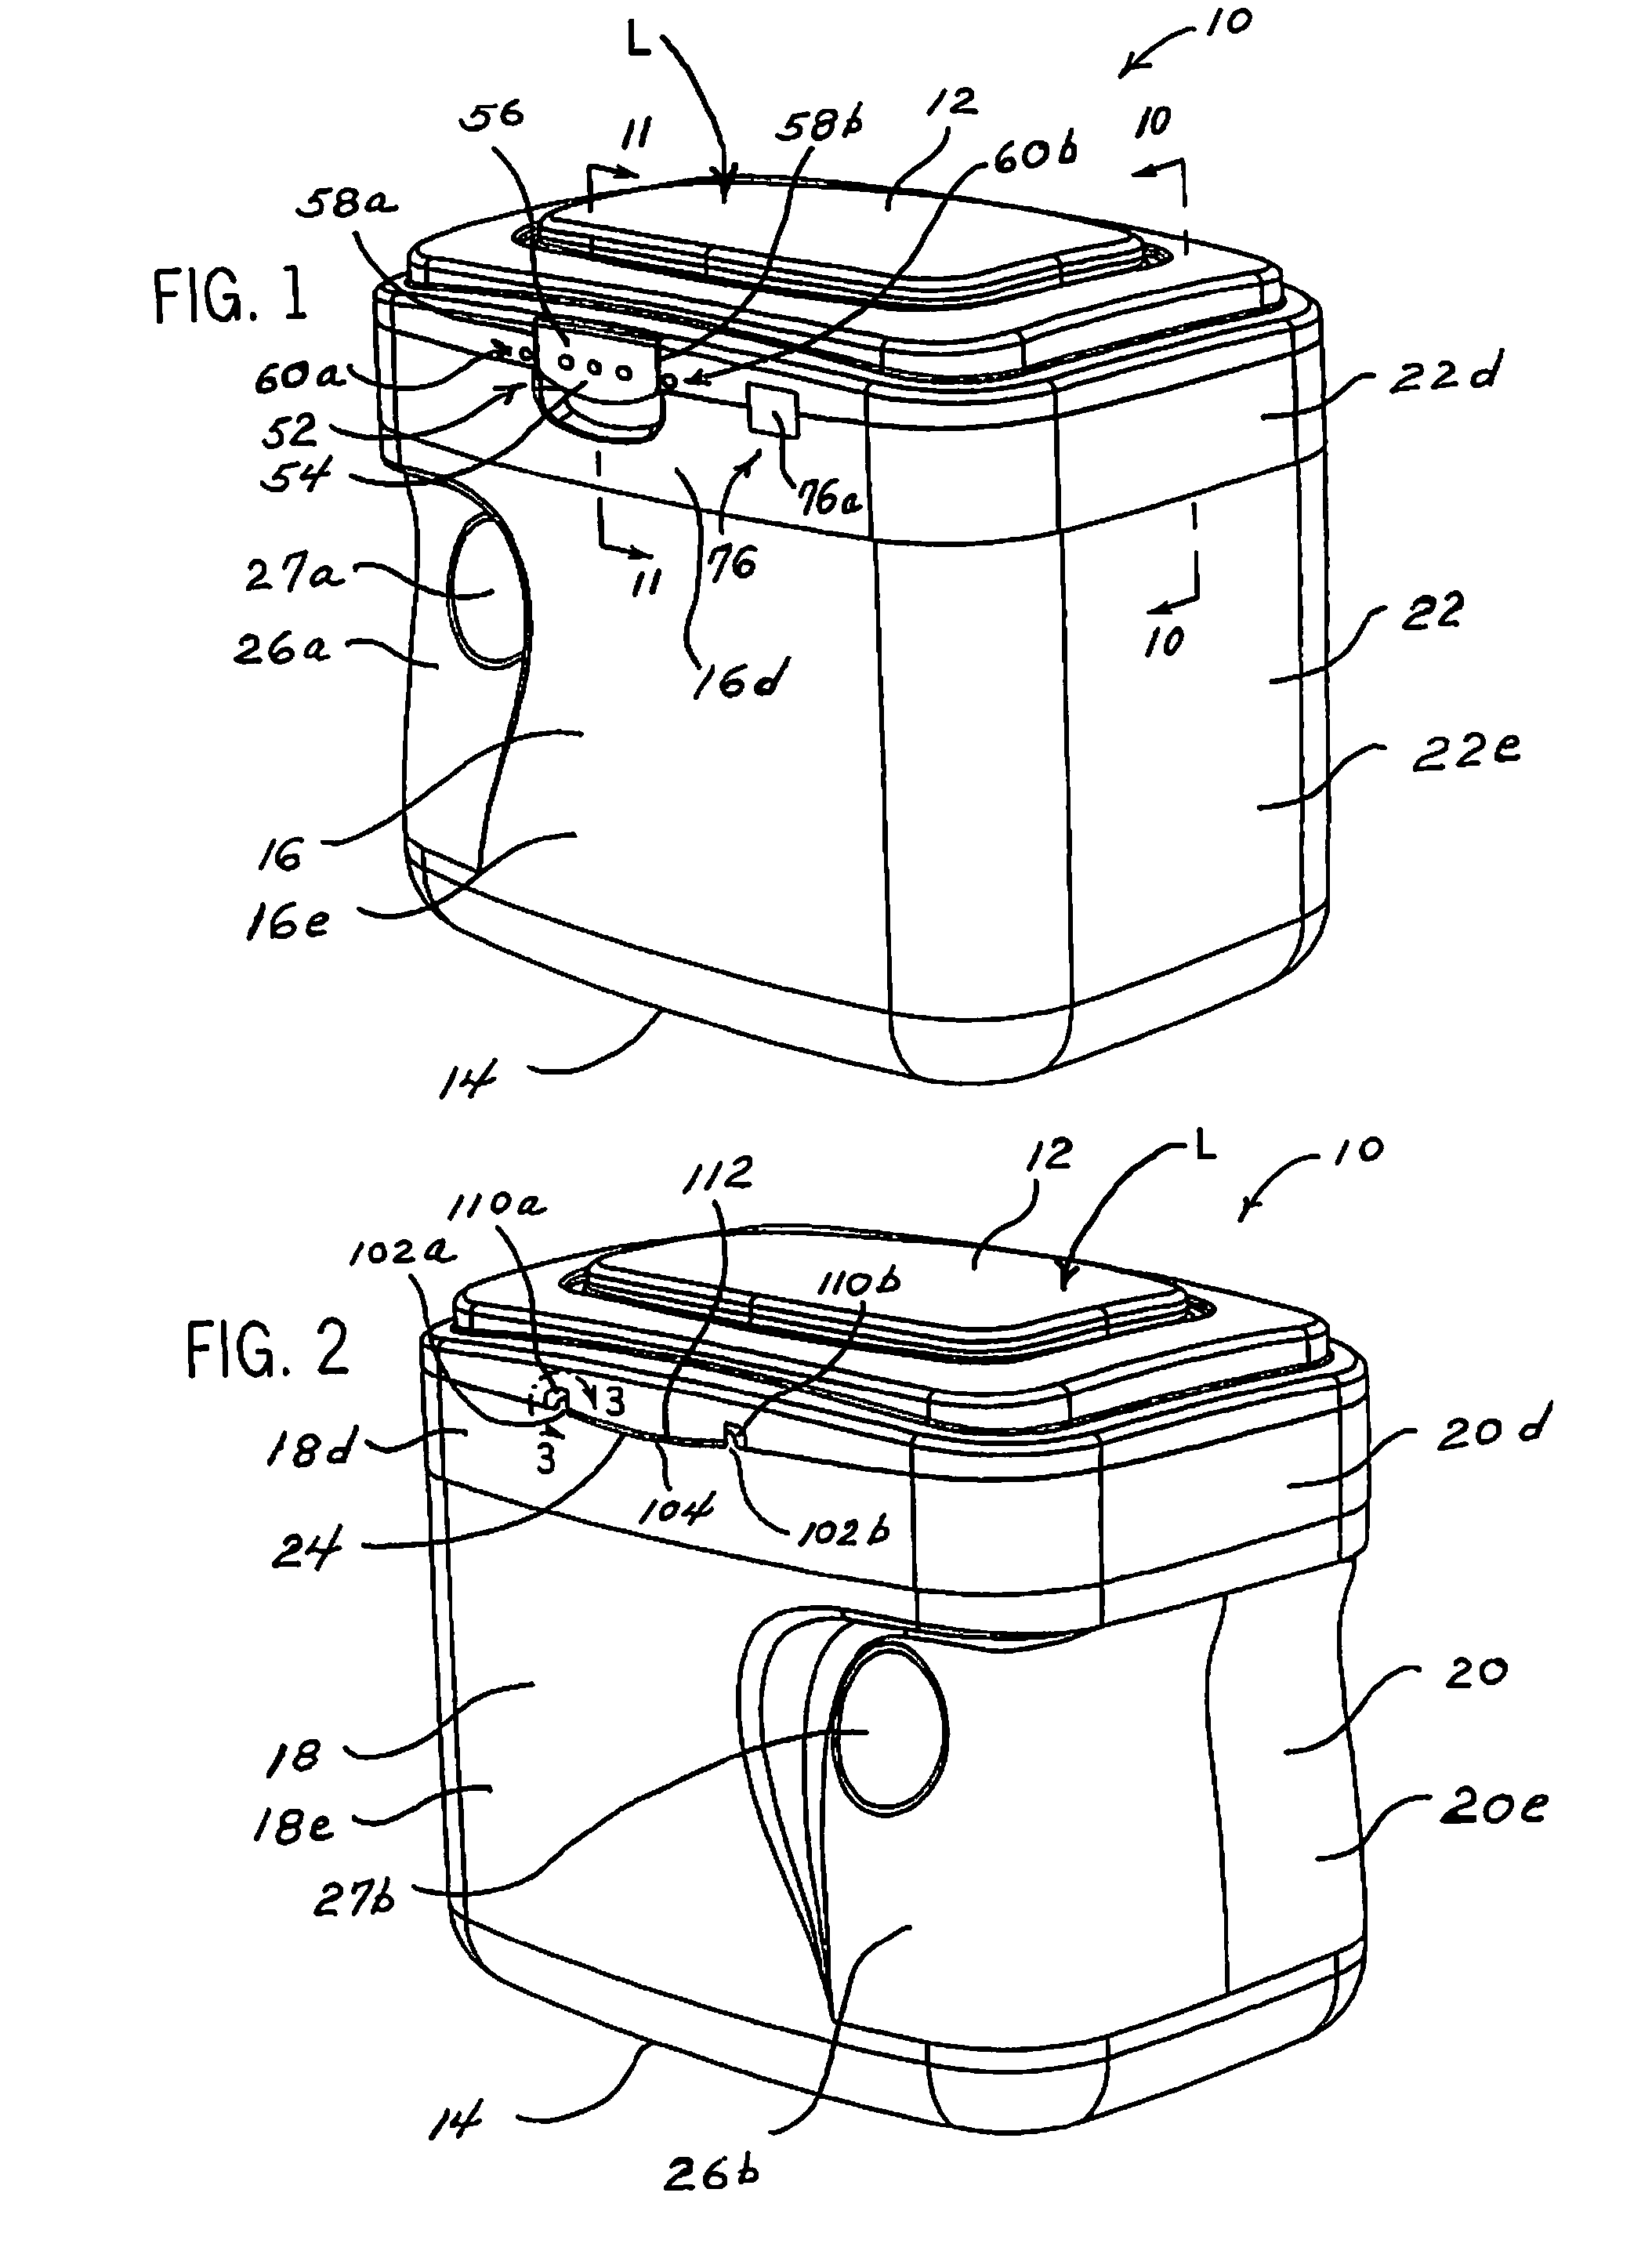 Container and Congruent Scoop Assembly